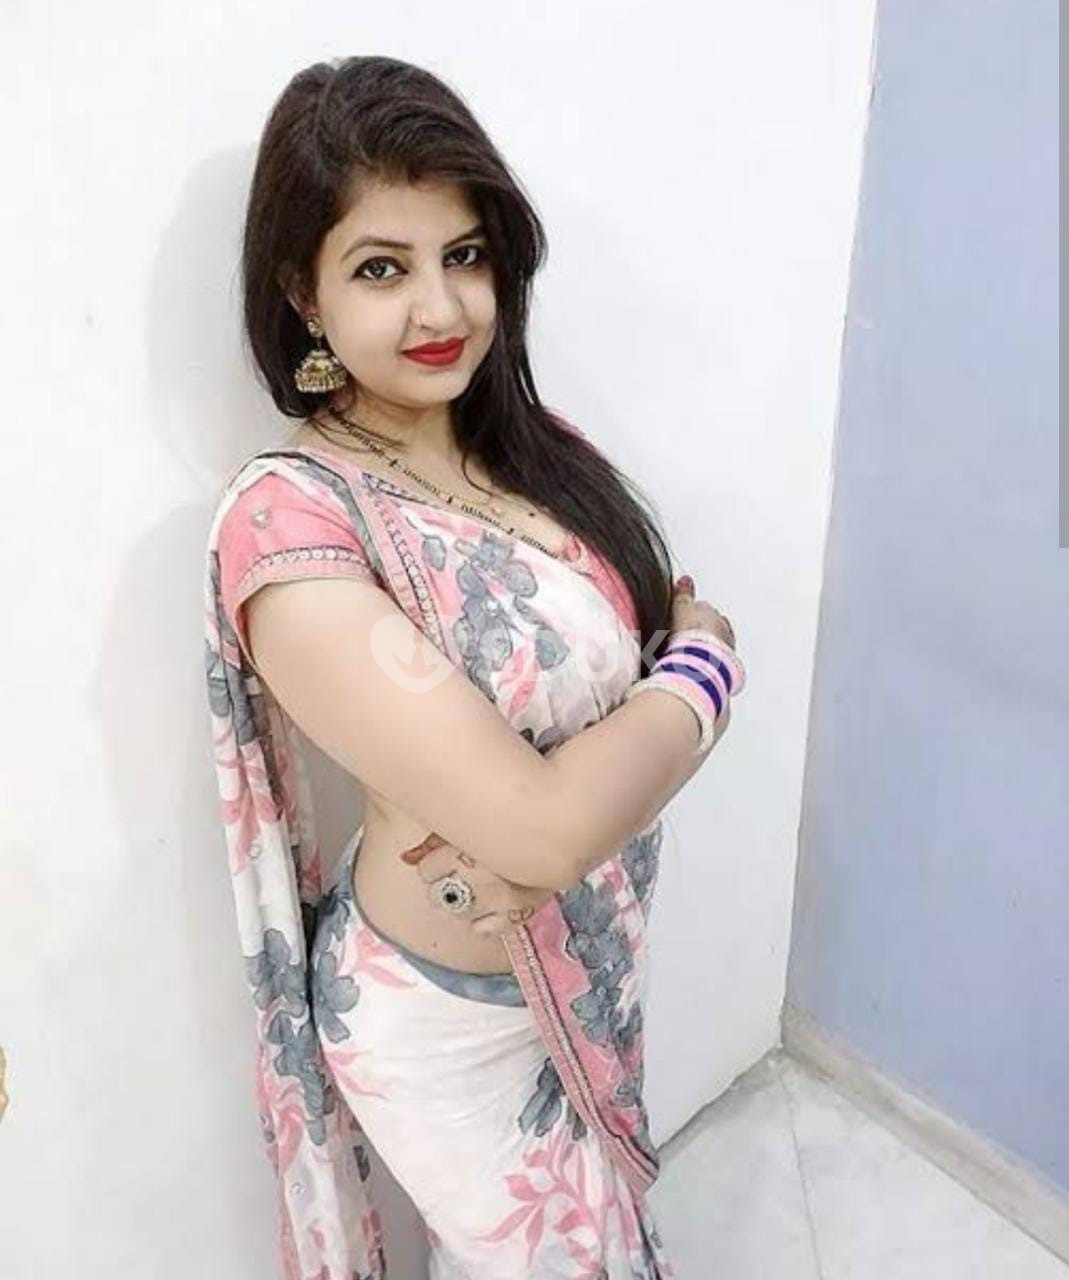 Pimpri Chinchwad _79876 /// 98405 HIGH PROFILE HOT SEXY VIP INDEPENDENT CALL GIRLS AVAILABLE ALL AREA AVAILABLE 24×7